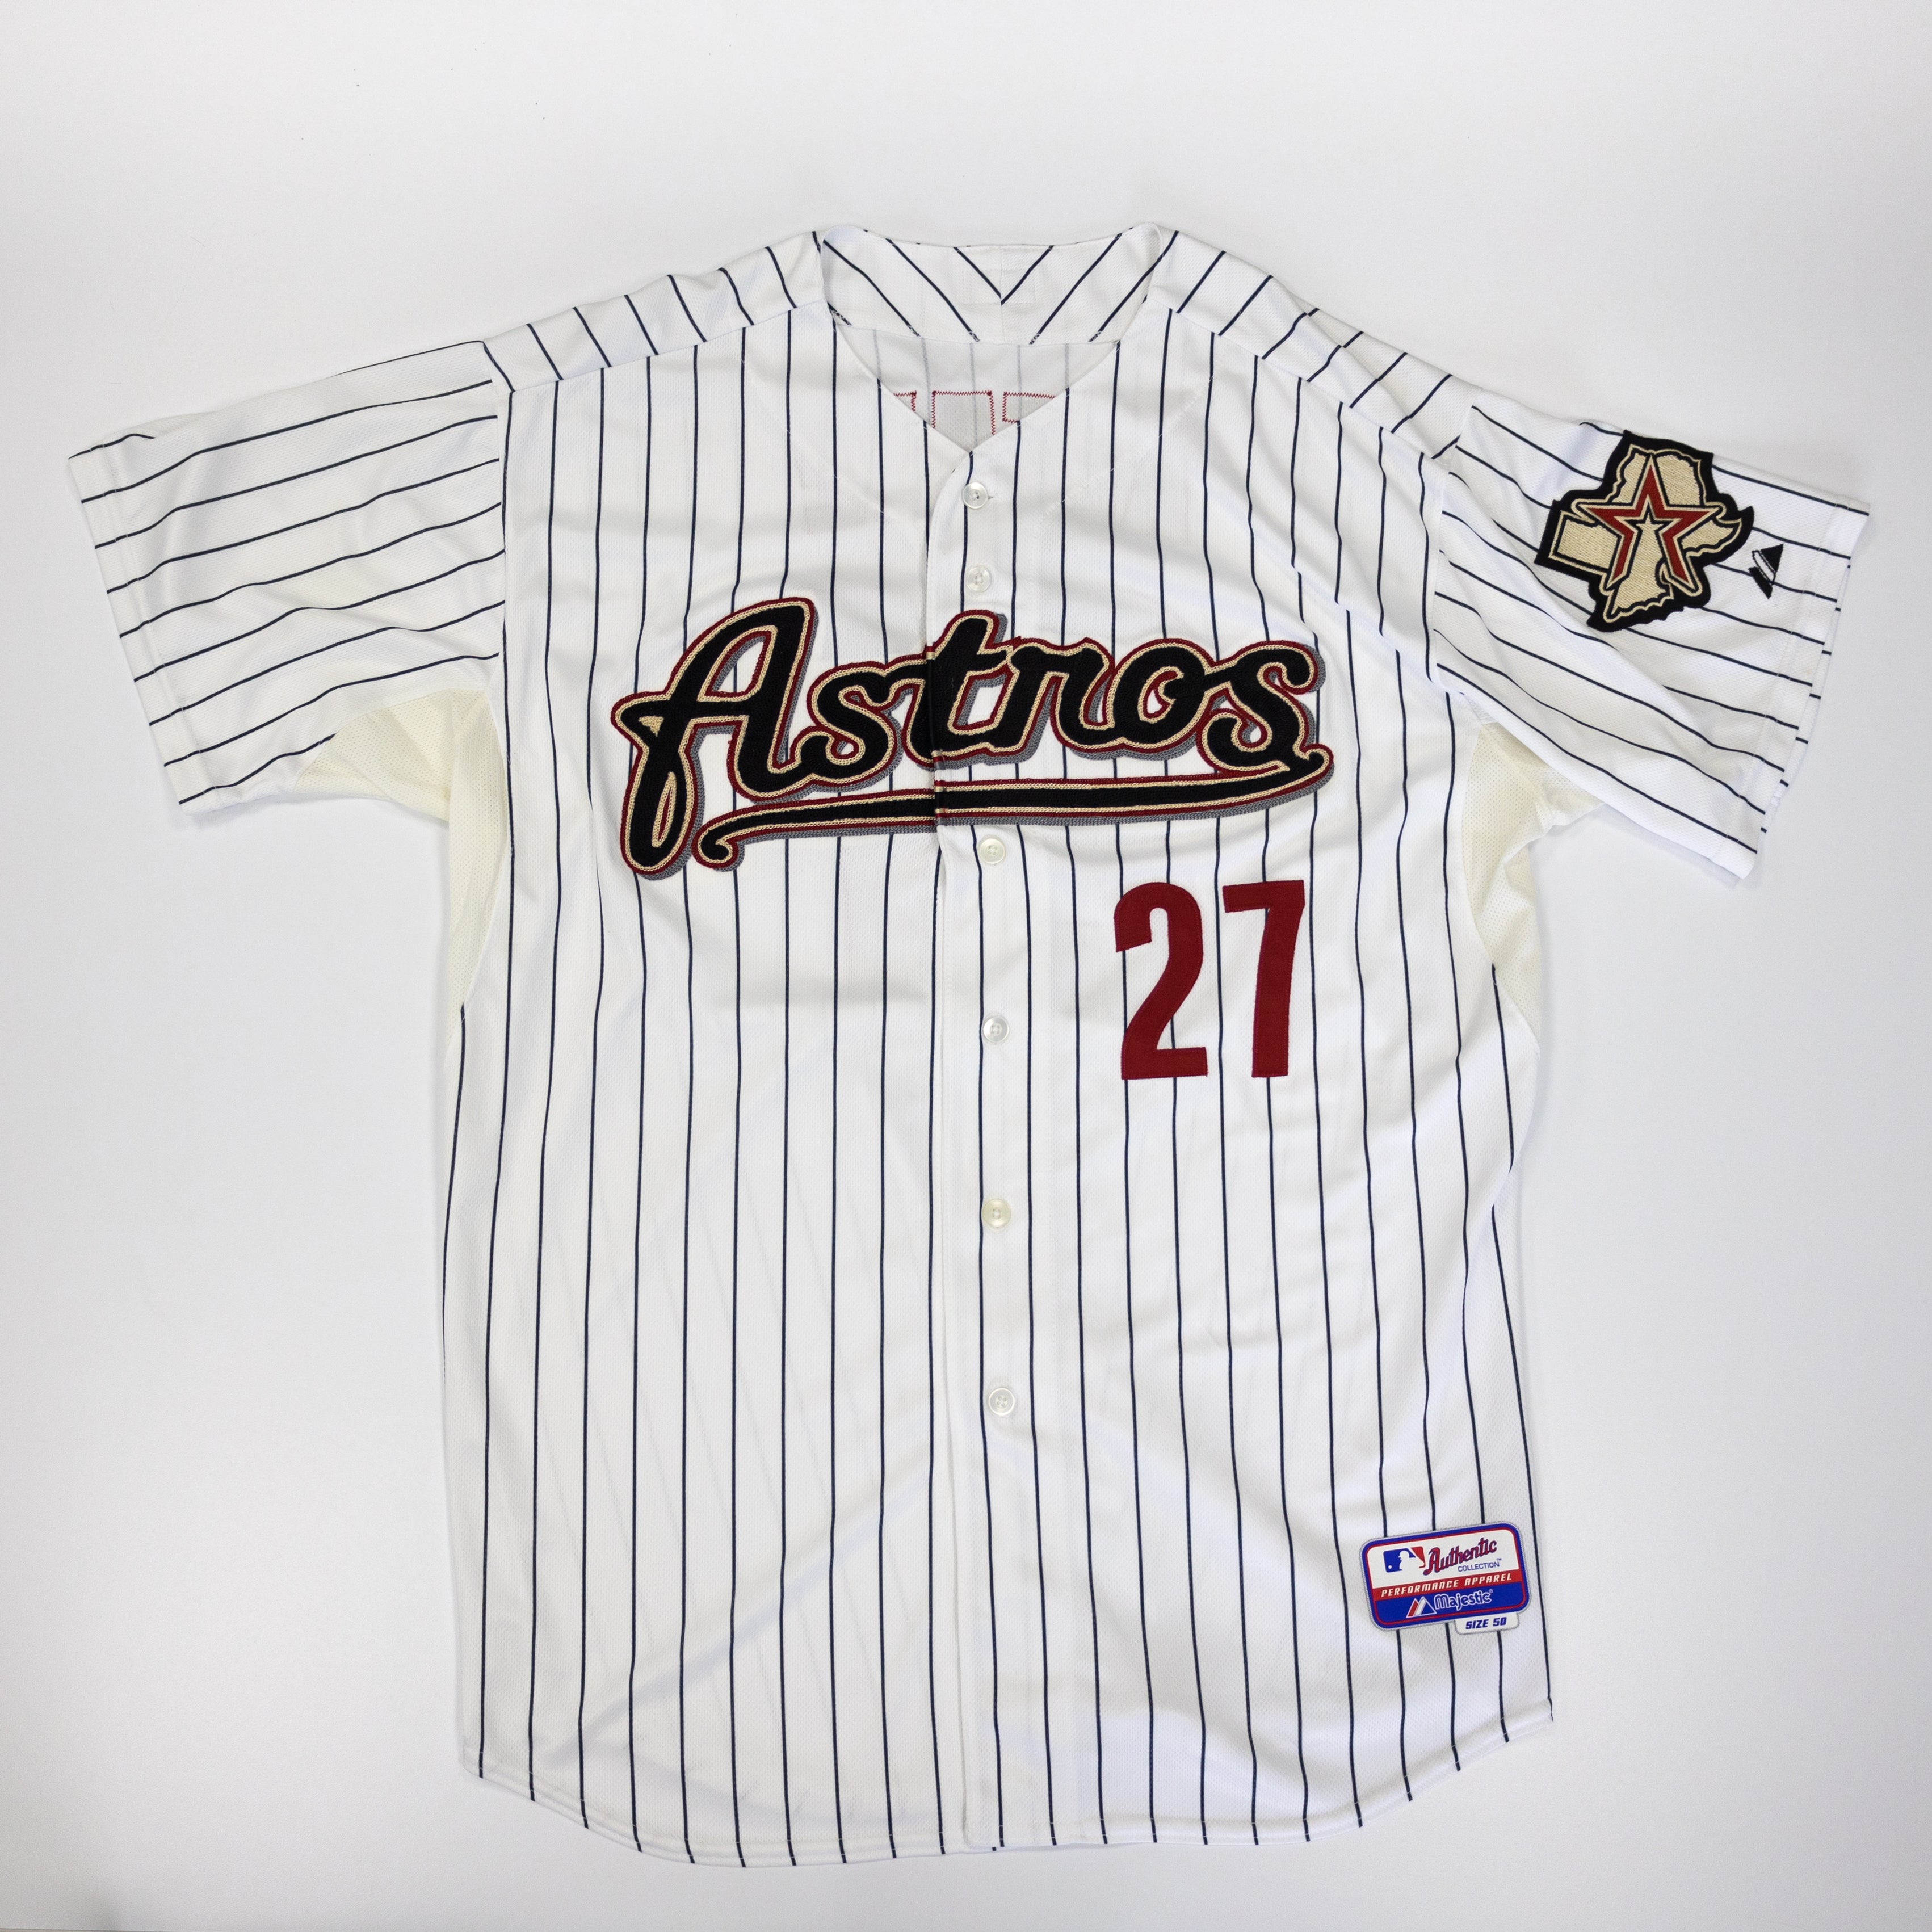 Houston Astros Jerseys (Black, White, Or Space City) for Sale in